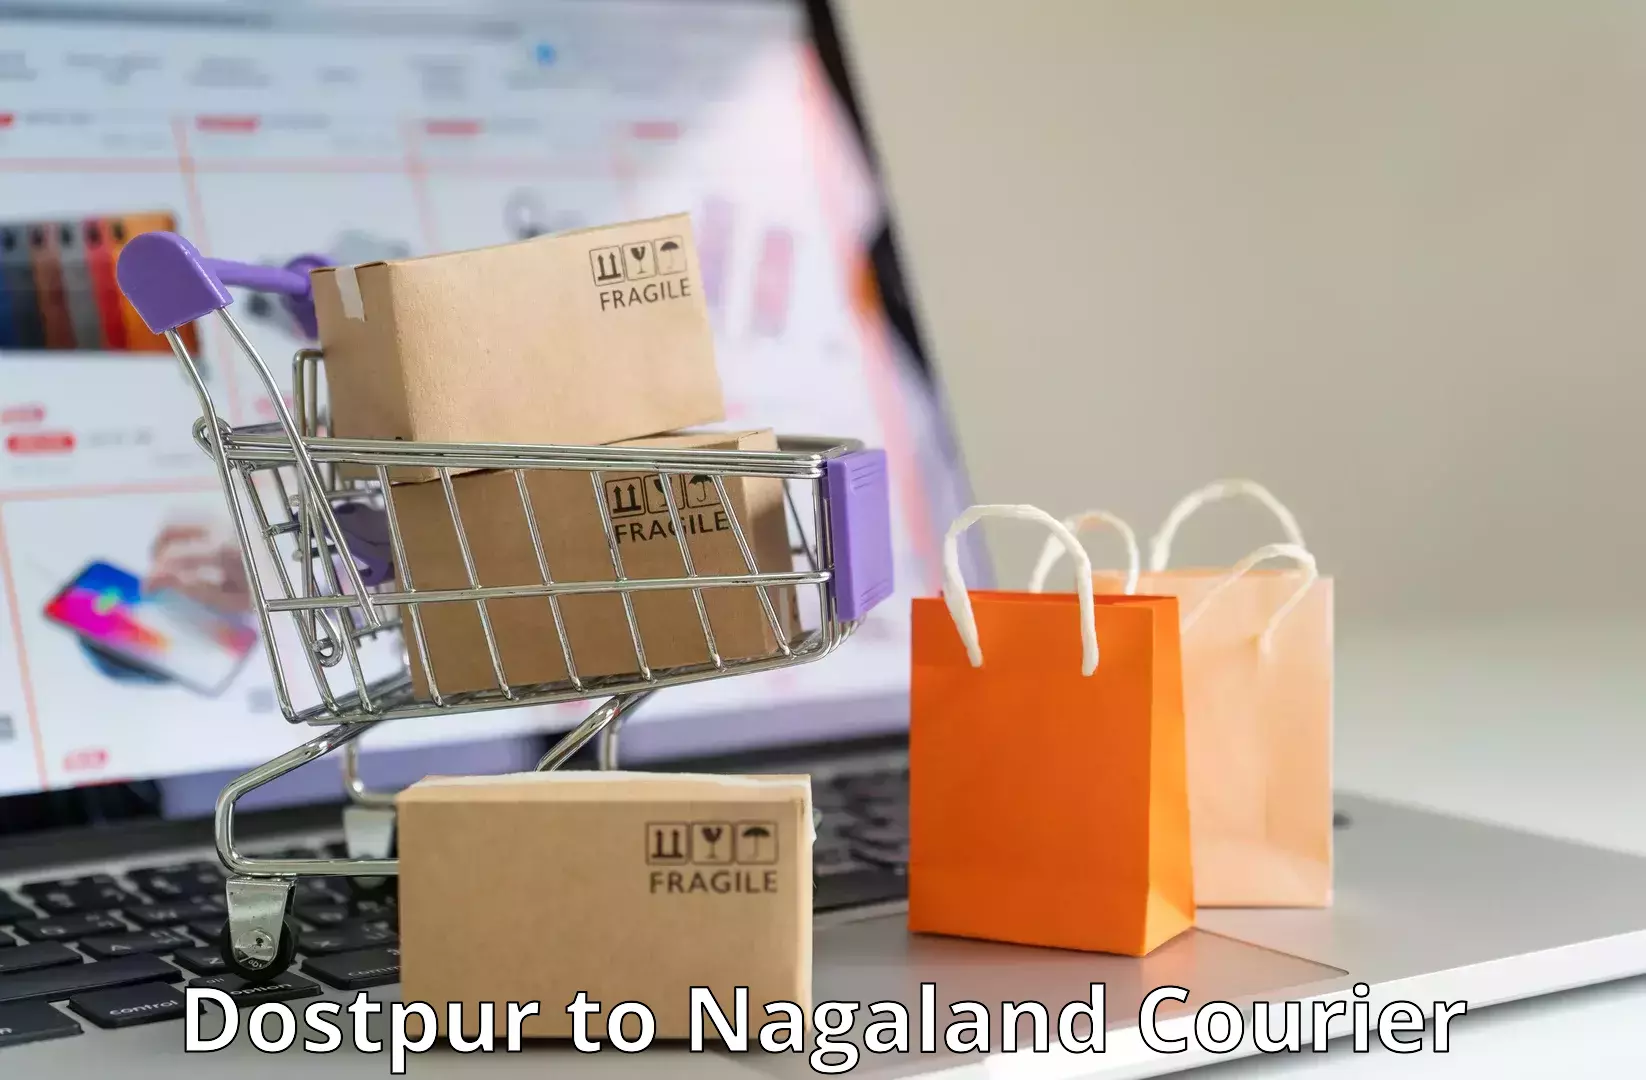 Trackable shipping service Dostpur to Nagaland